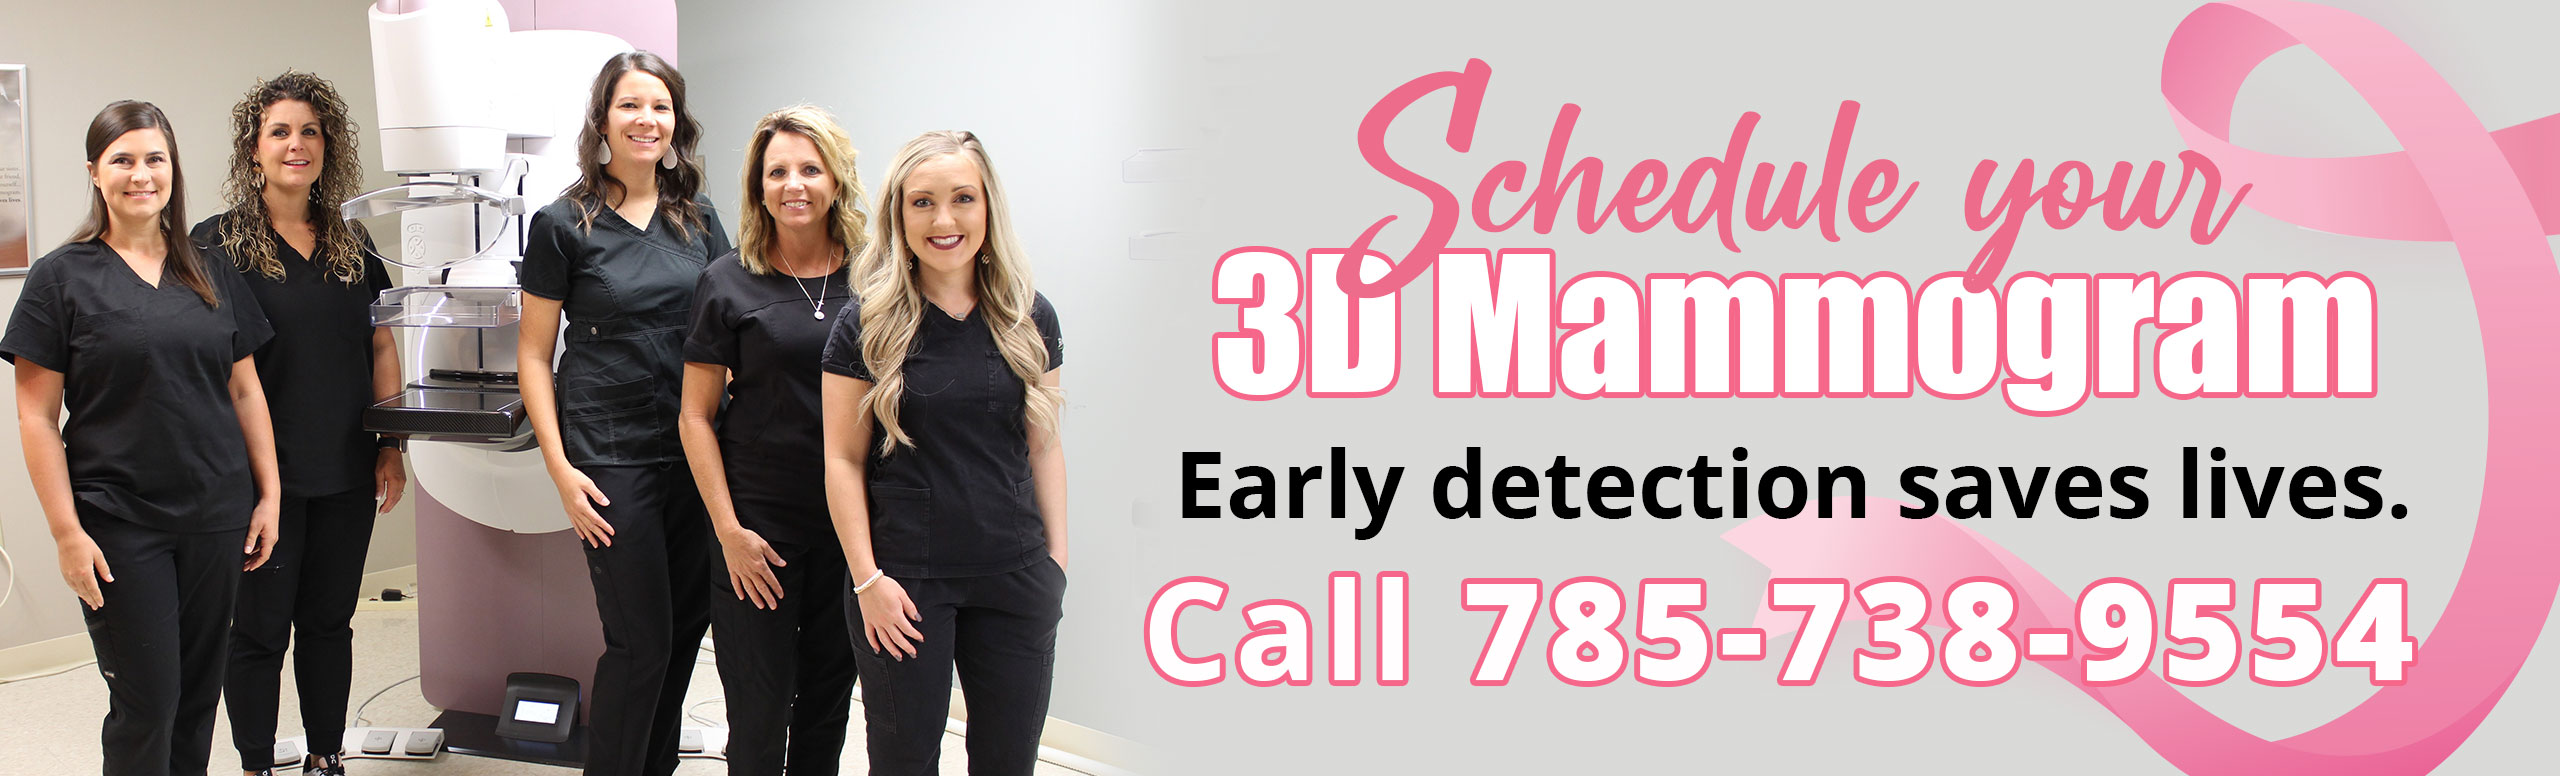 Schedule your 3D Mammogram 
Early detection saves lives.
Call 785-738-9554